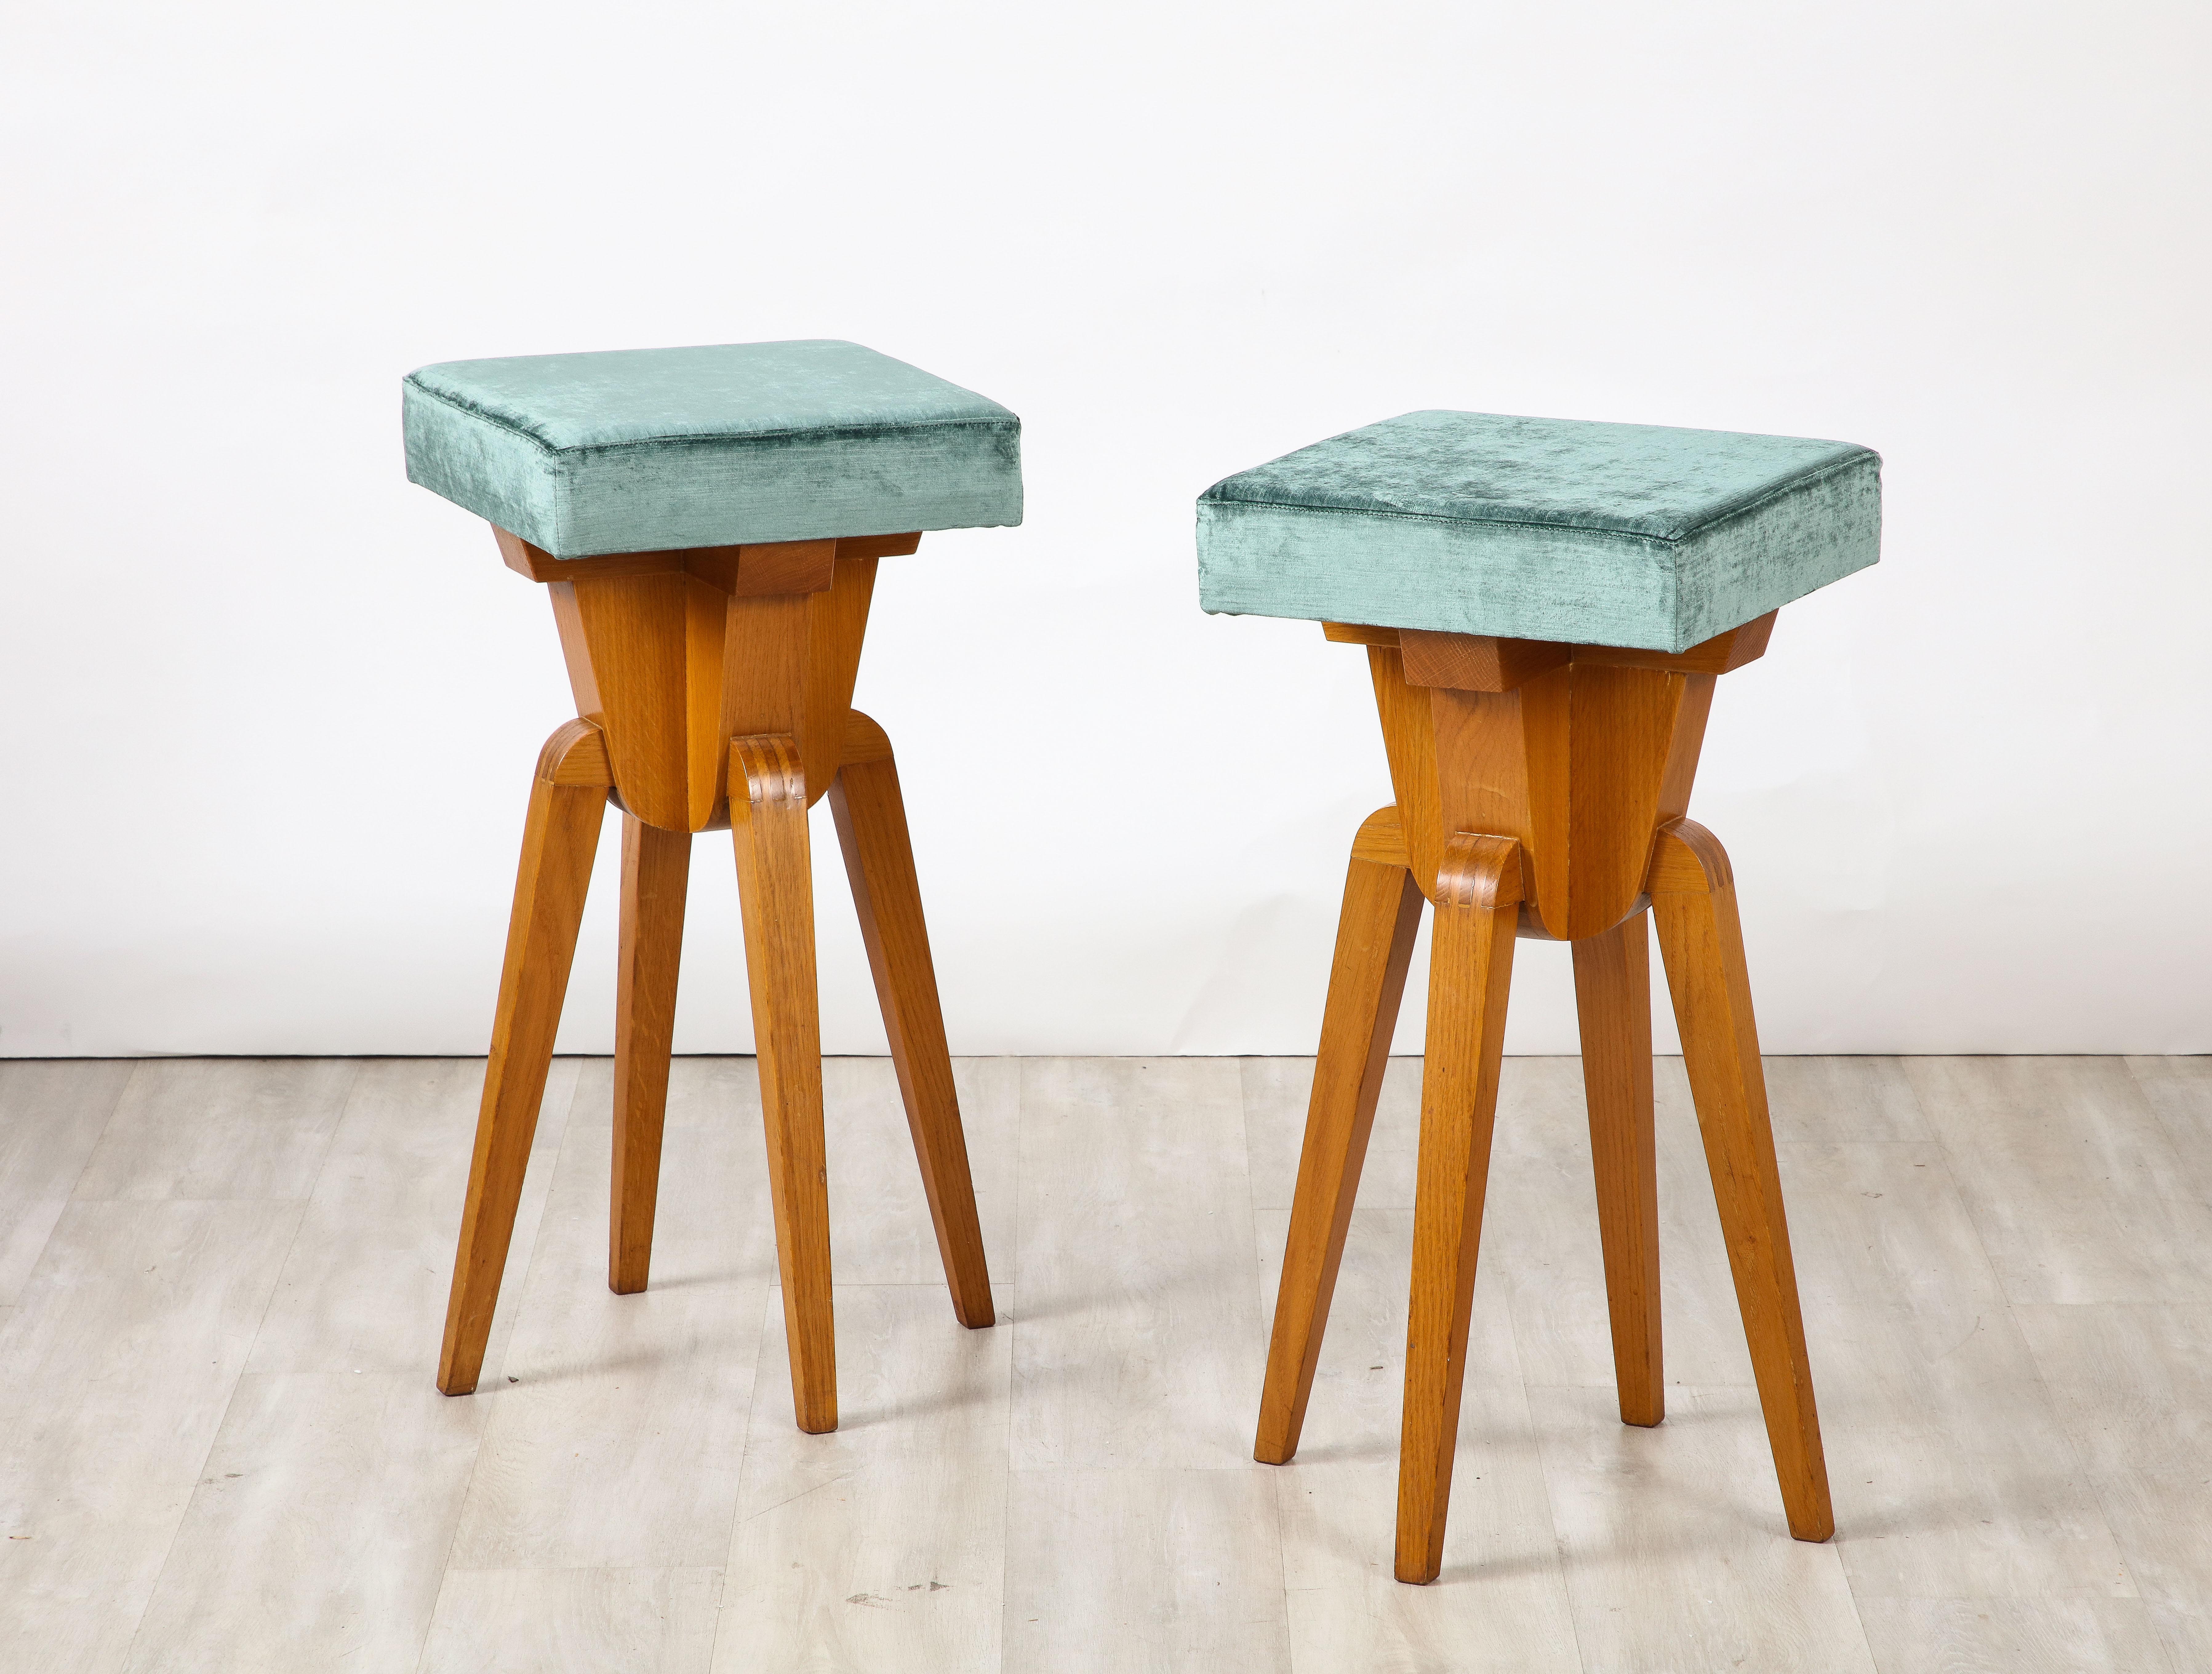 Italian modernist carved oak bar stools, highly sculptural with square seats.  Very unique, would add a special element to a kitchen or bar. Newly re-upholstered in an Italian velvet of turquoise/teal coloring. 
Northern Italy, circa 1950 
Size: 29